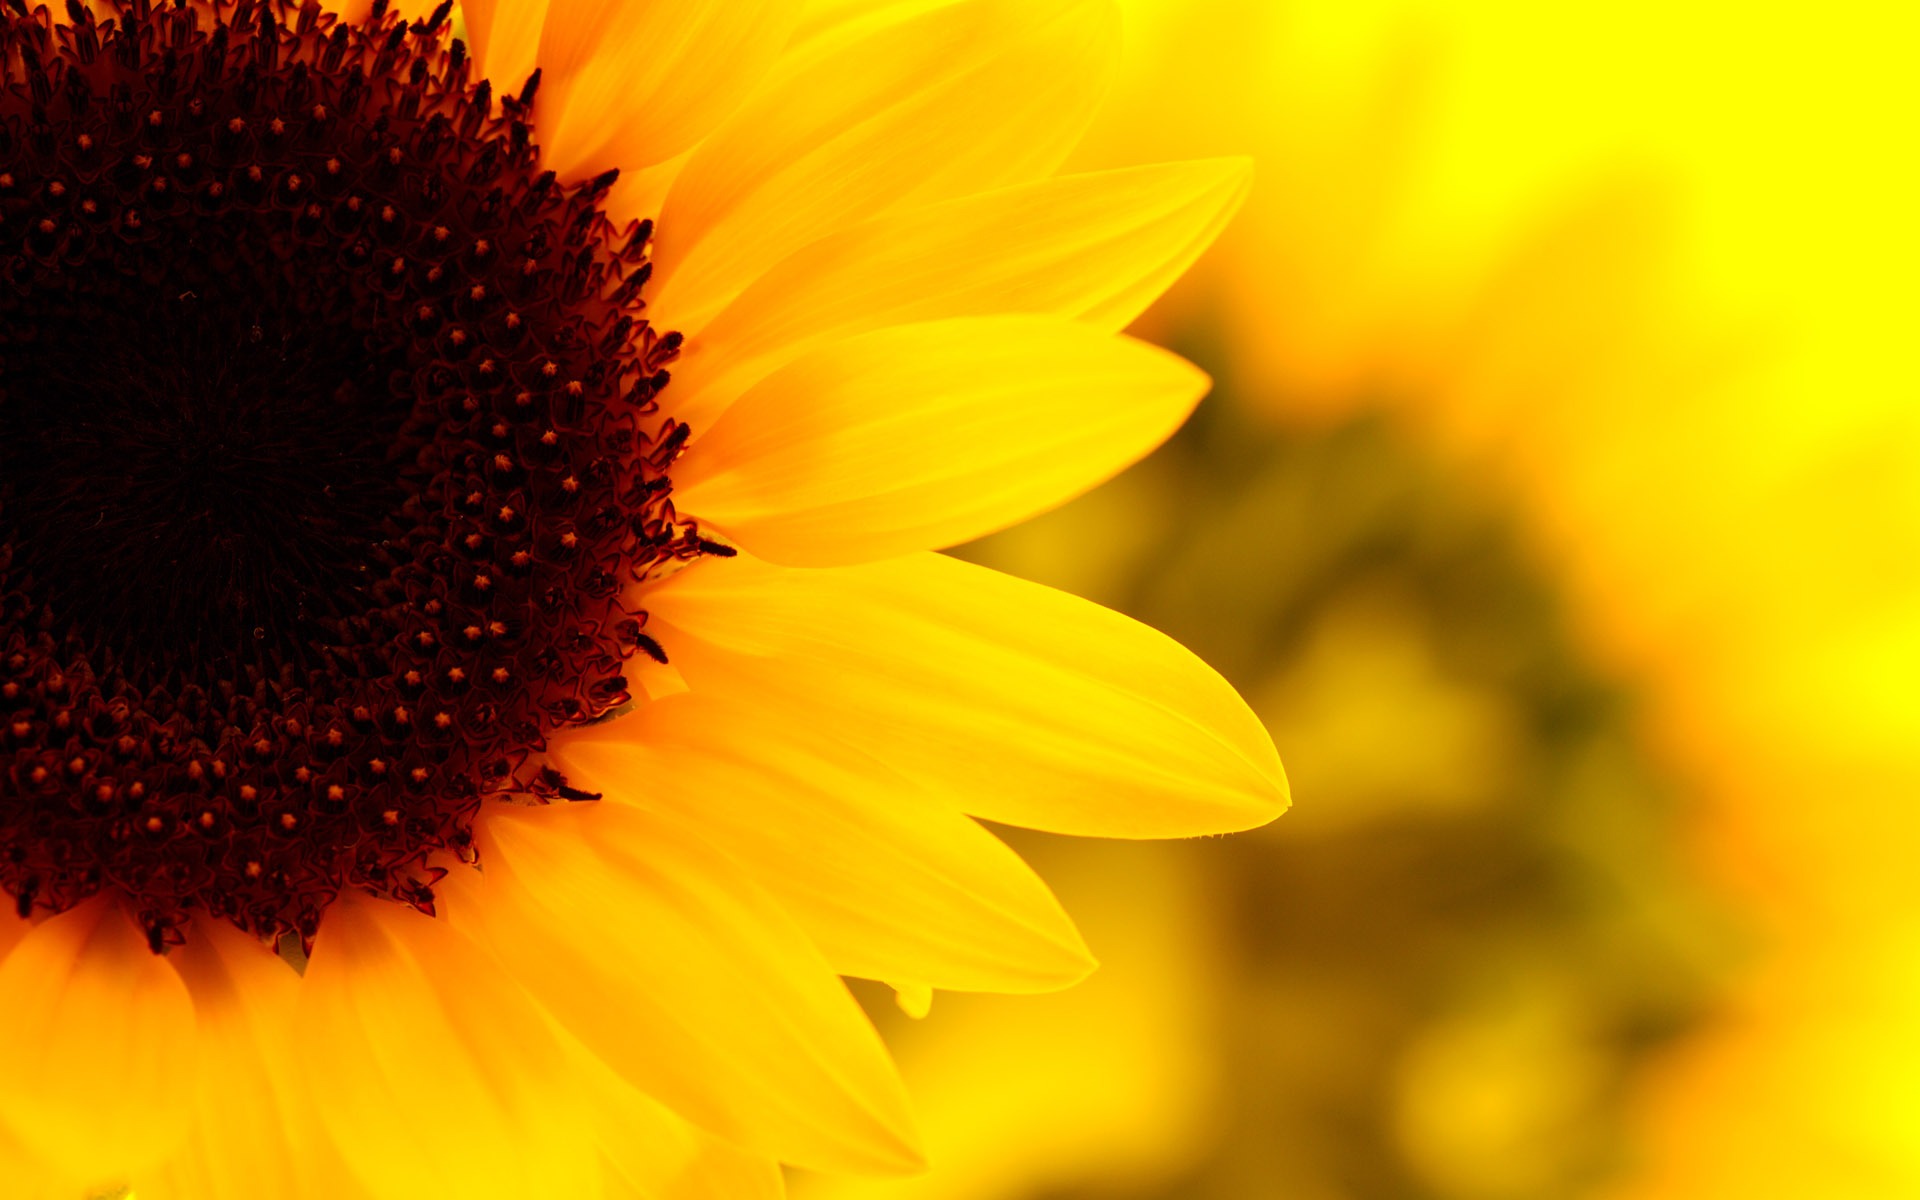 Sunny sunflower photo HD Wallpapers #10 - 1920x1200